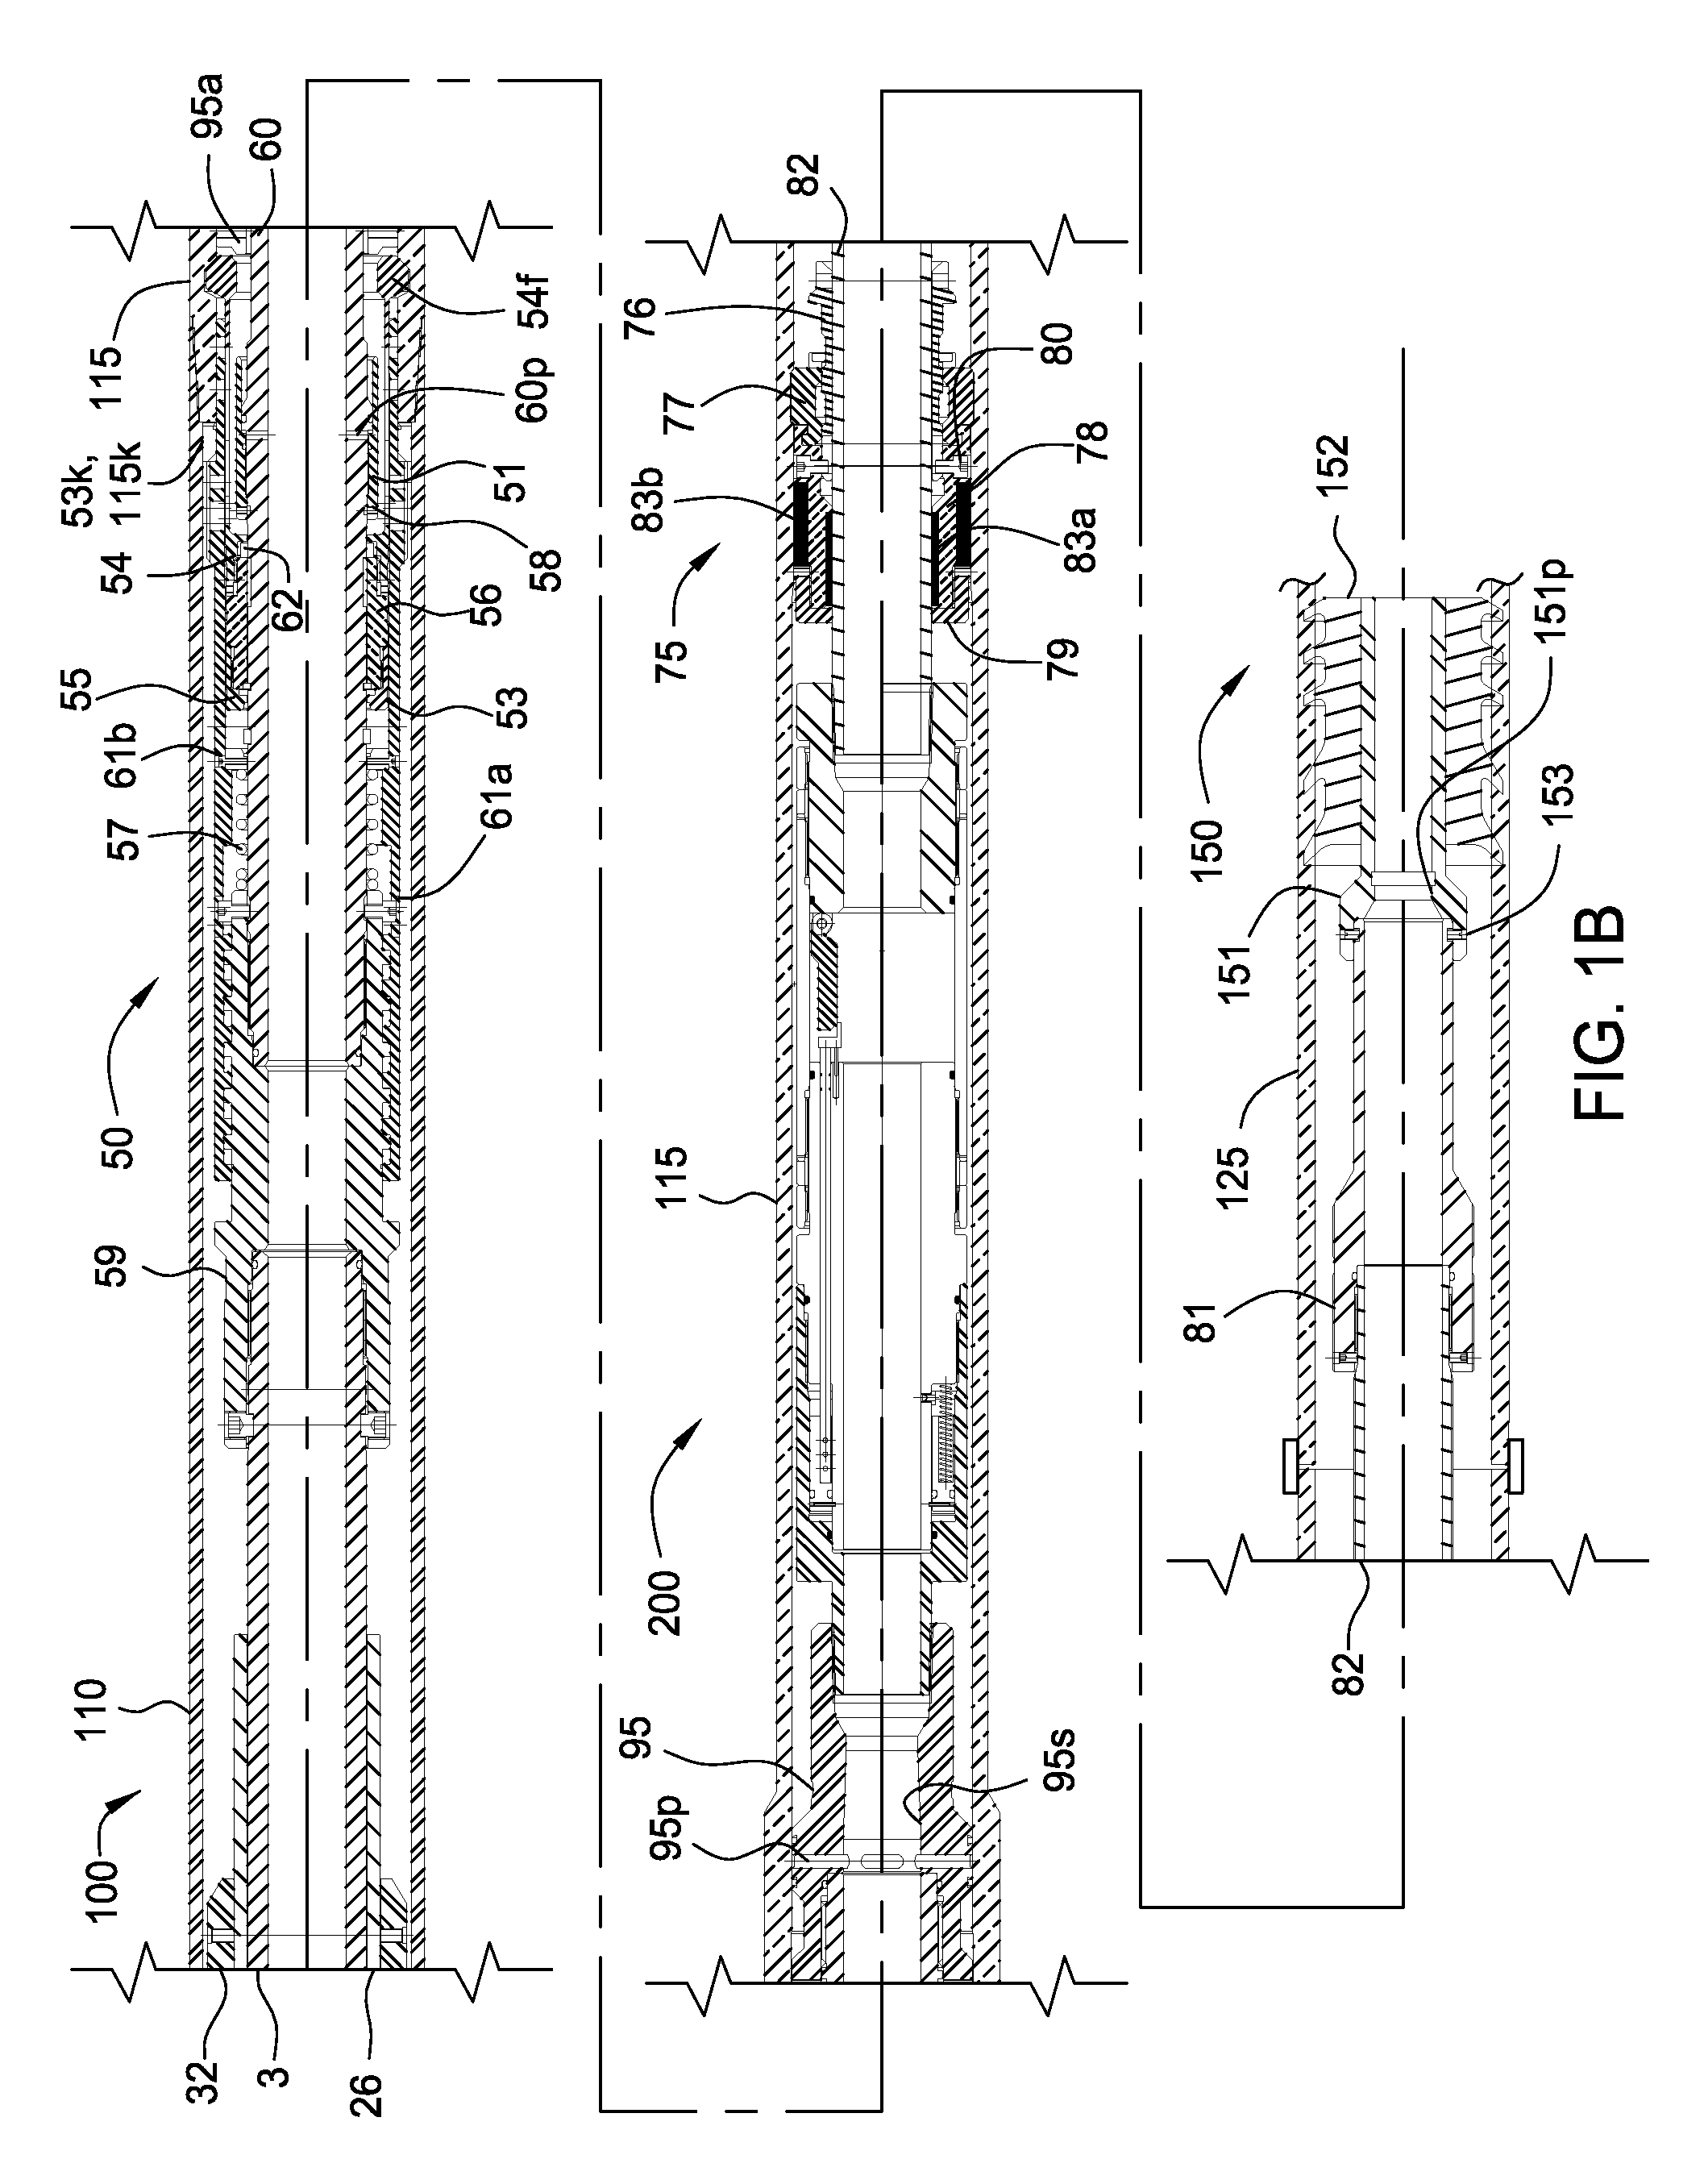 Tools and methods for hanging and/or expanding liner strings